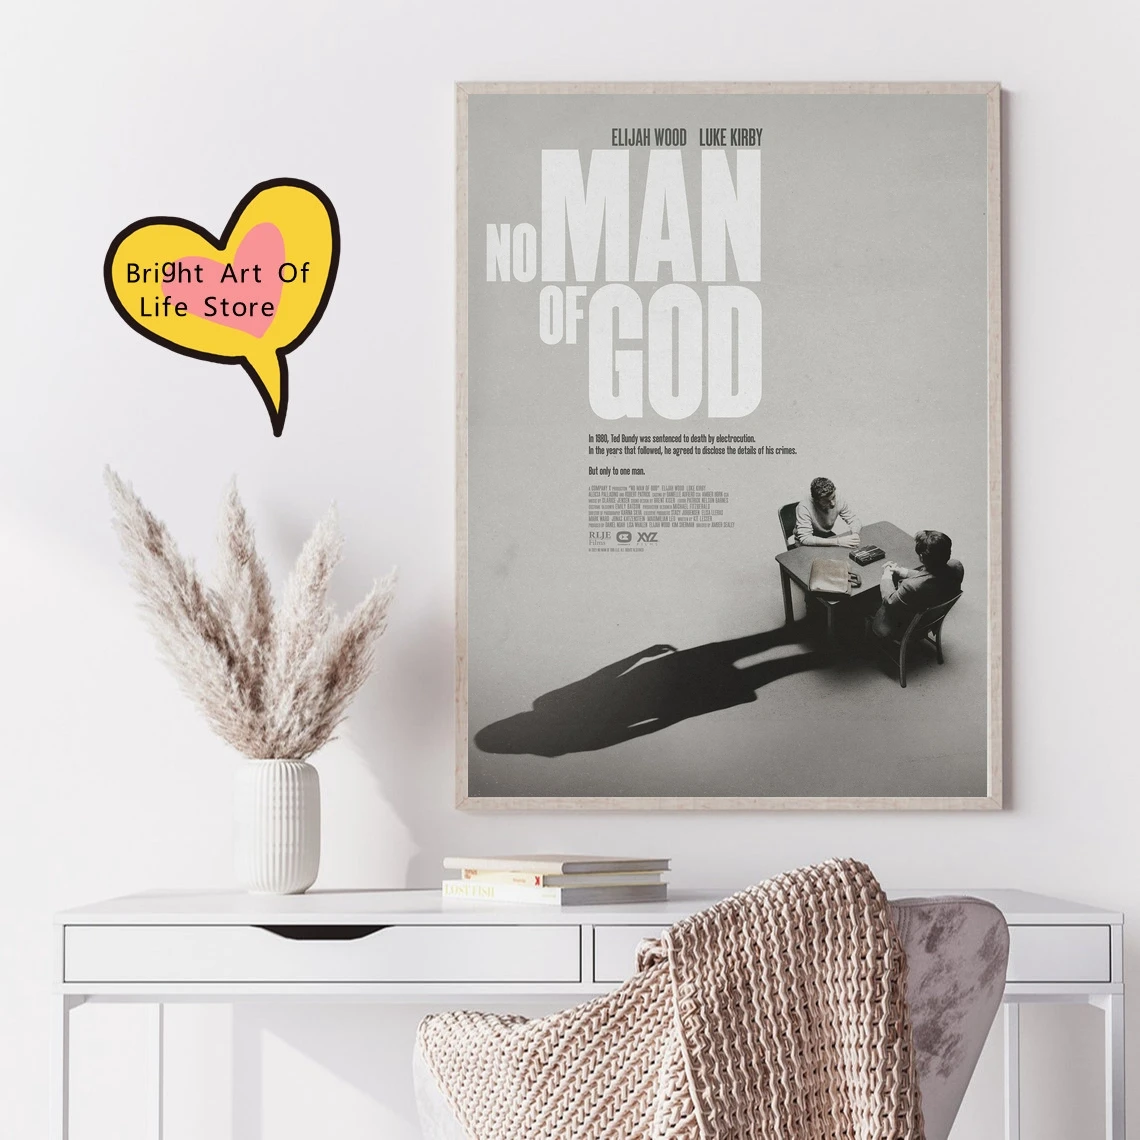 

No Man of God (2021) Movie Poster Cover Photo Print Canvas Wall Art Home Decor (Unframed)